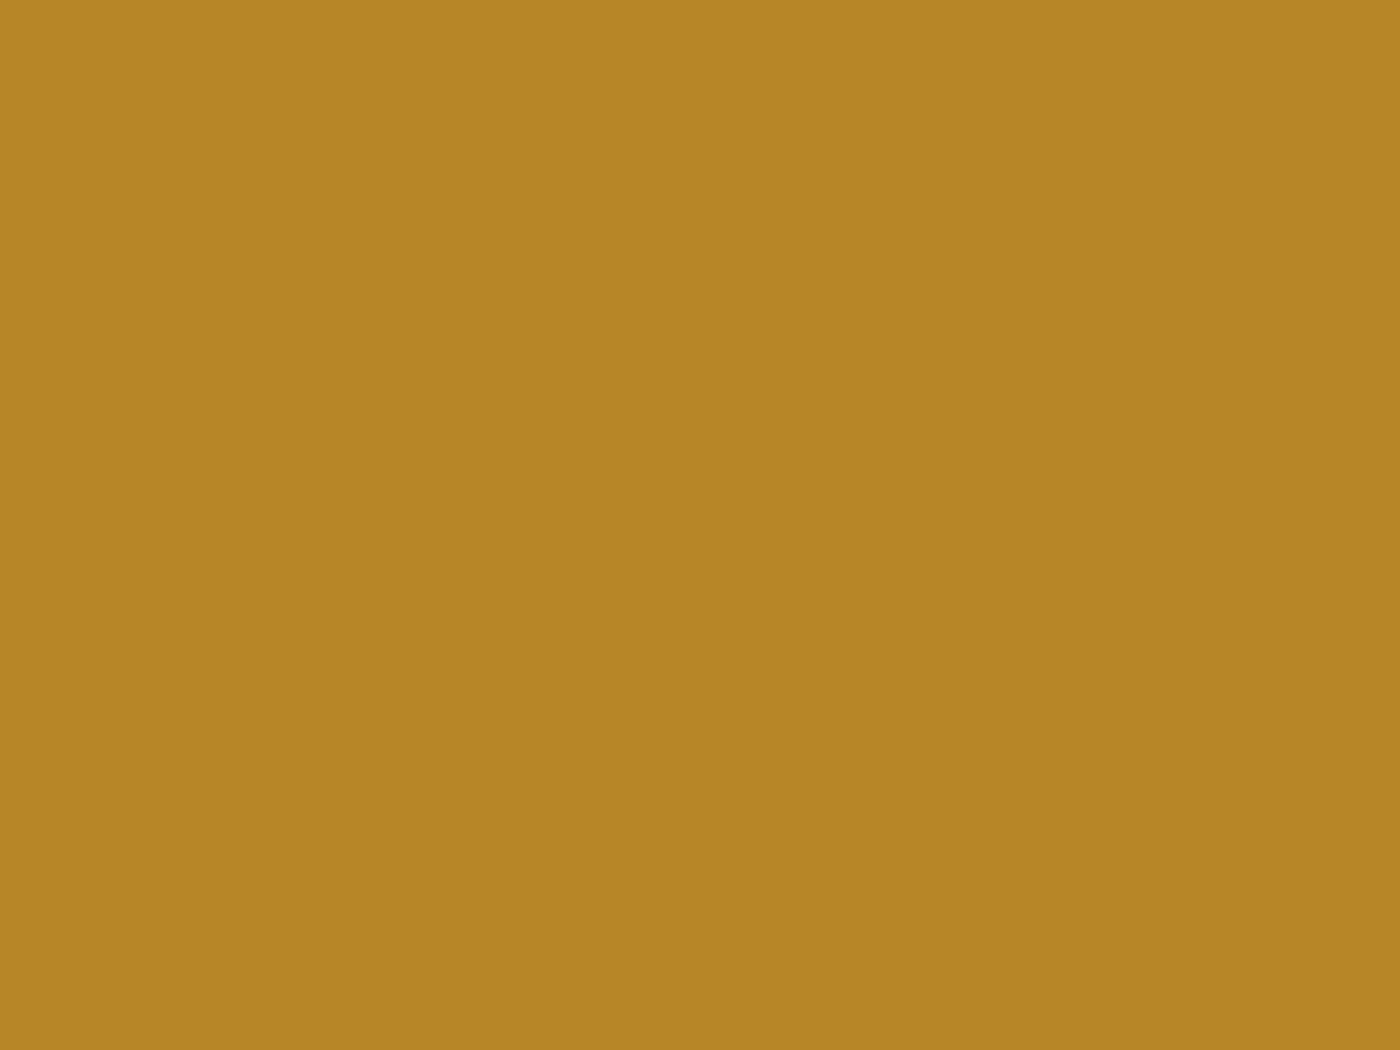 1400x1050 University Of California Gold Solid Color Background